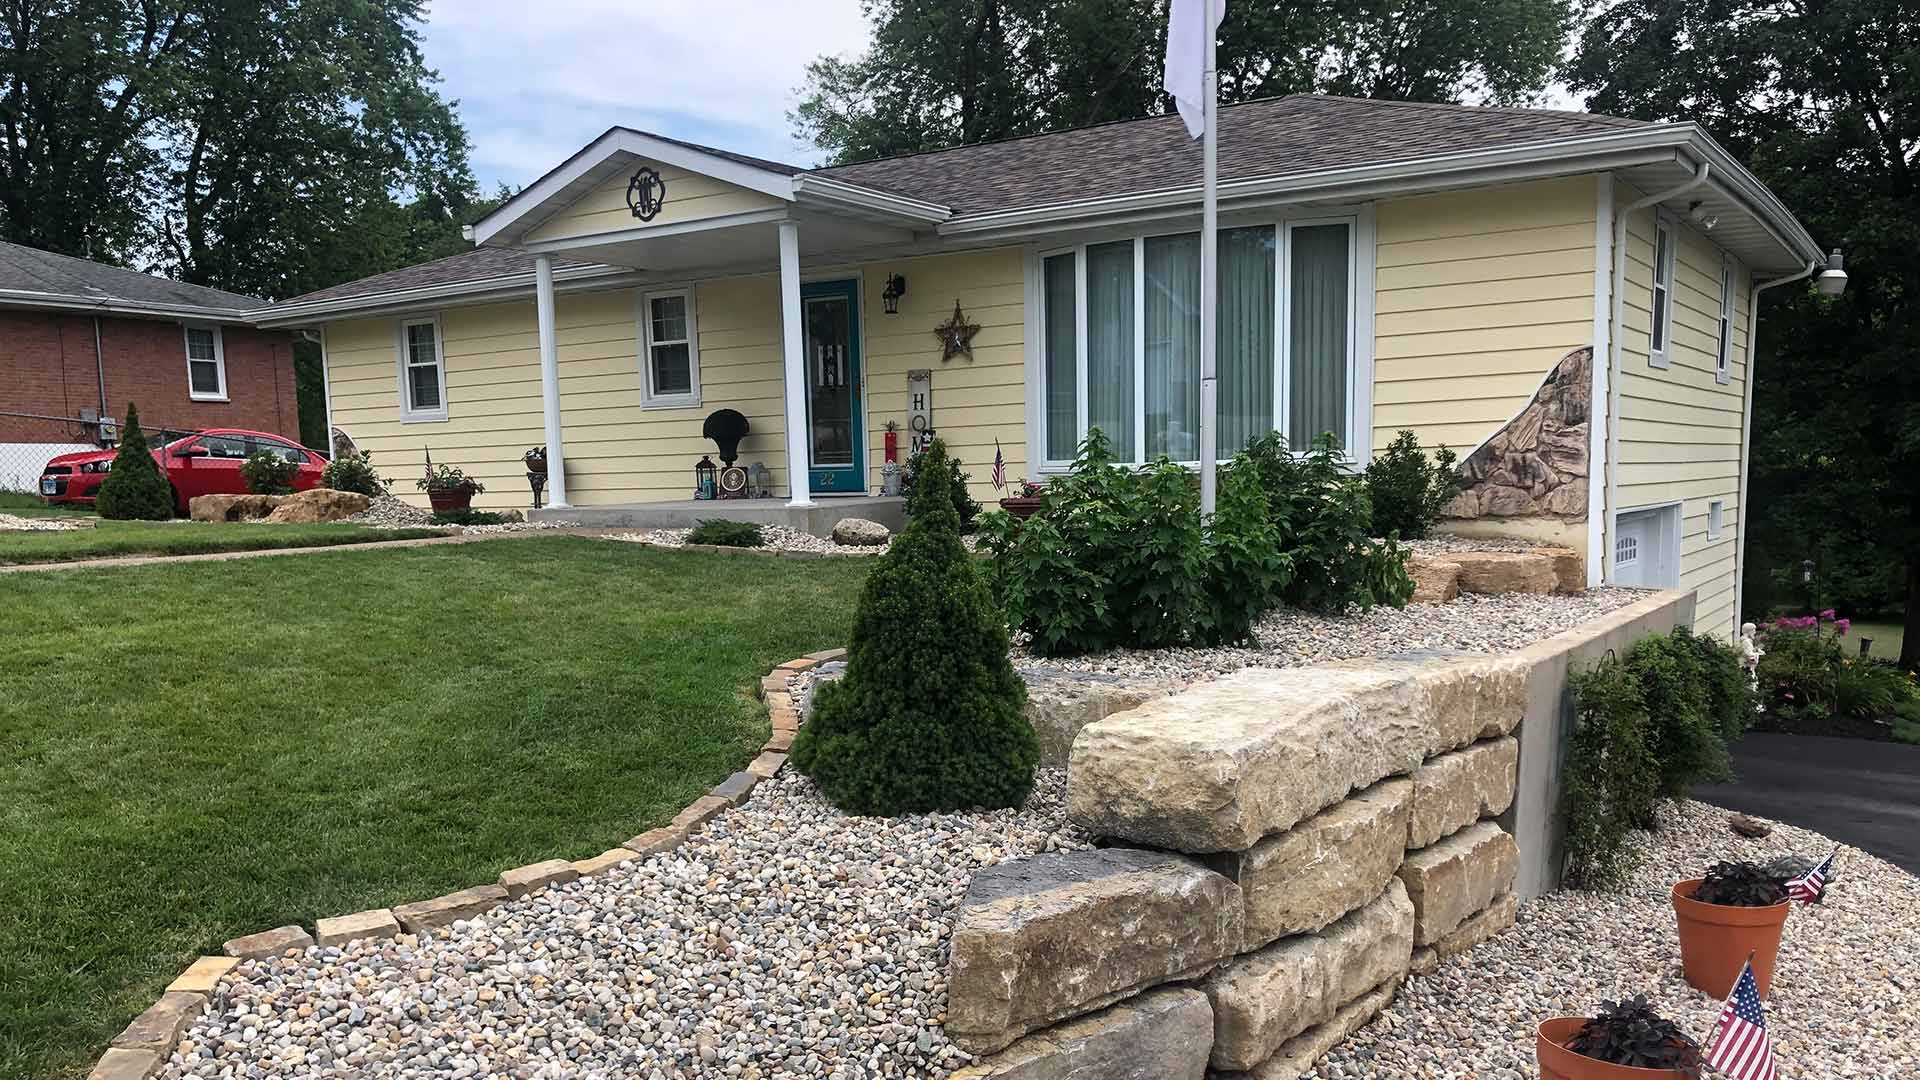 Retaining wall and landscape beds with rock ground covers in Moro, IL.